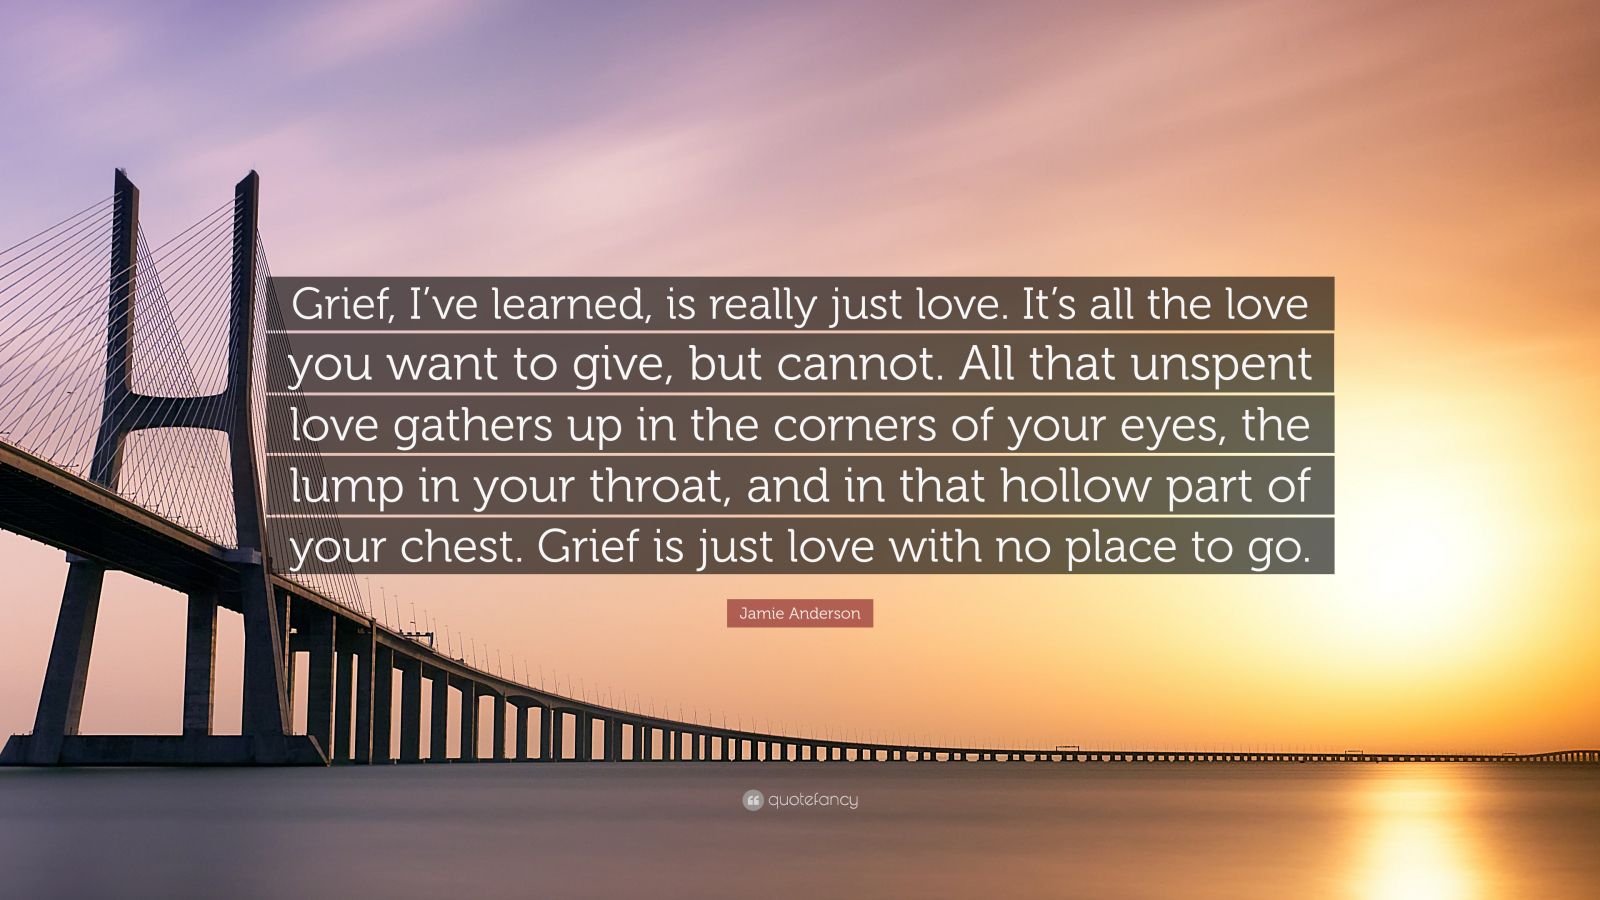 Jamie Anderson Quote: “Grief, I’ve learned, is really just love. It’s